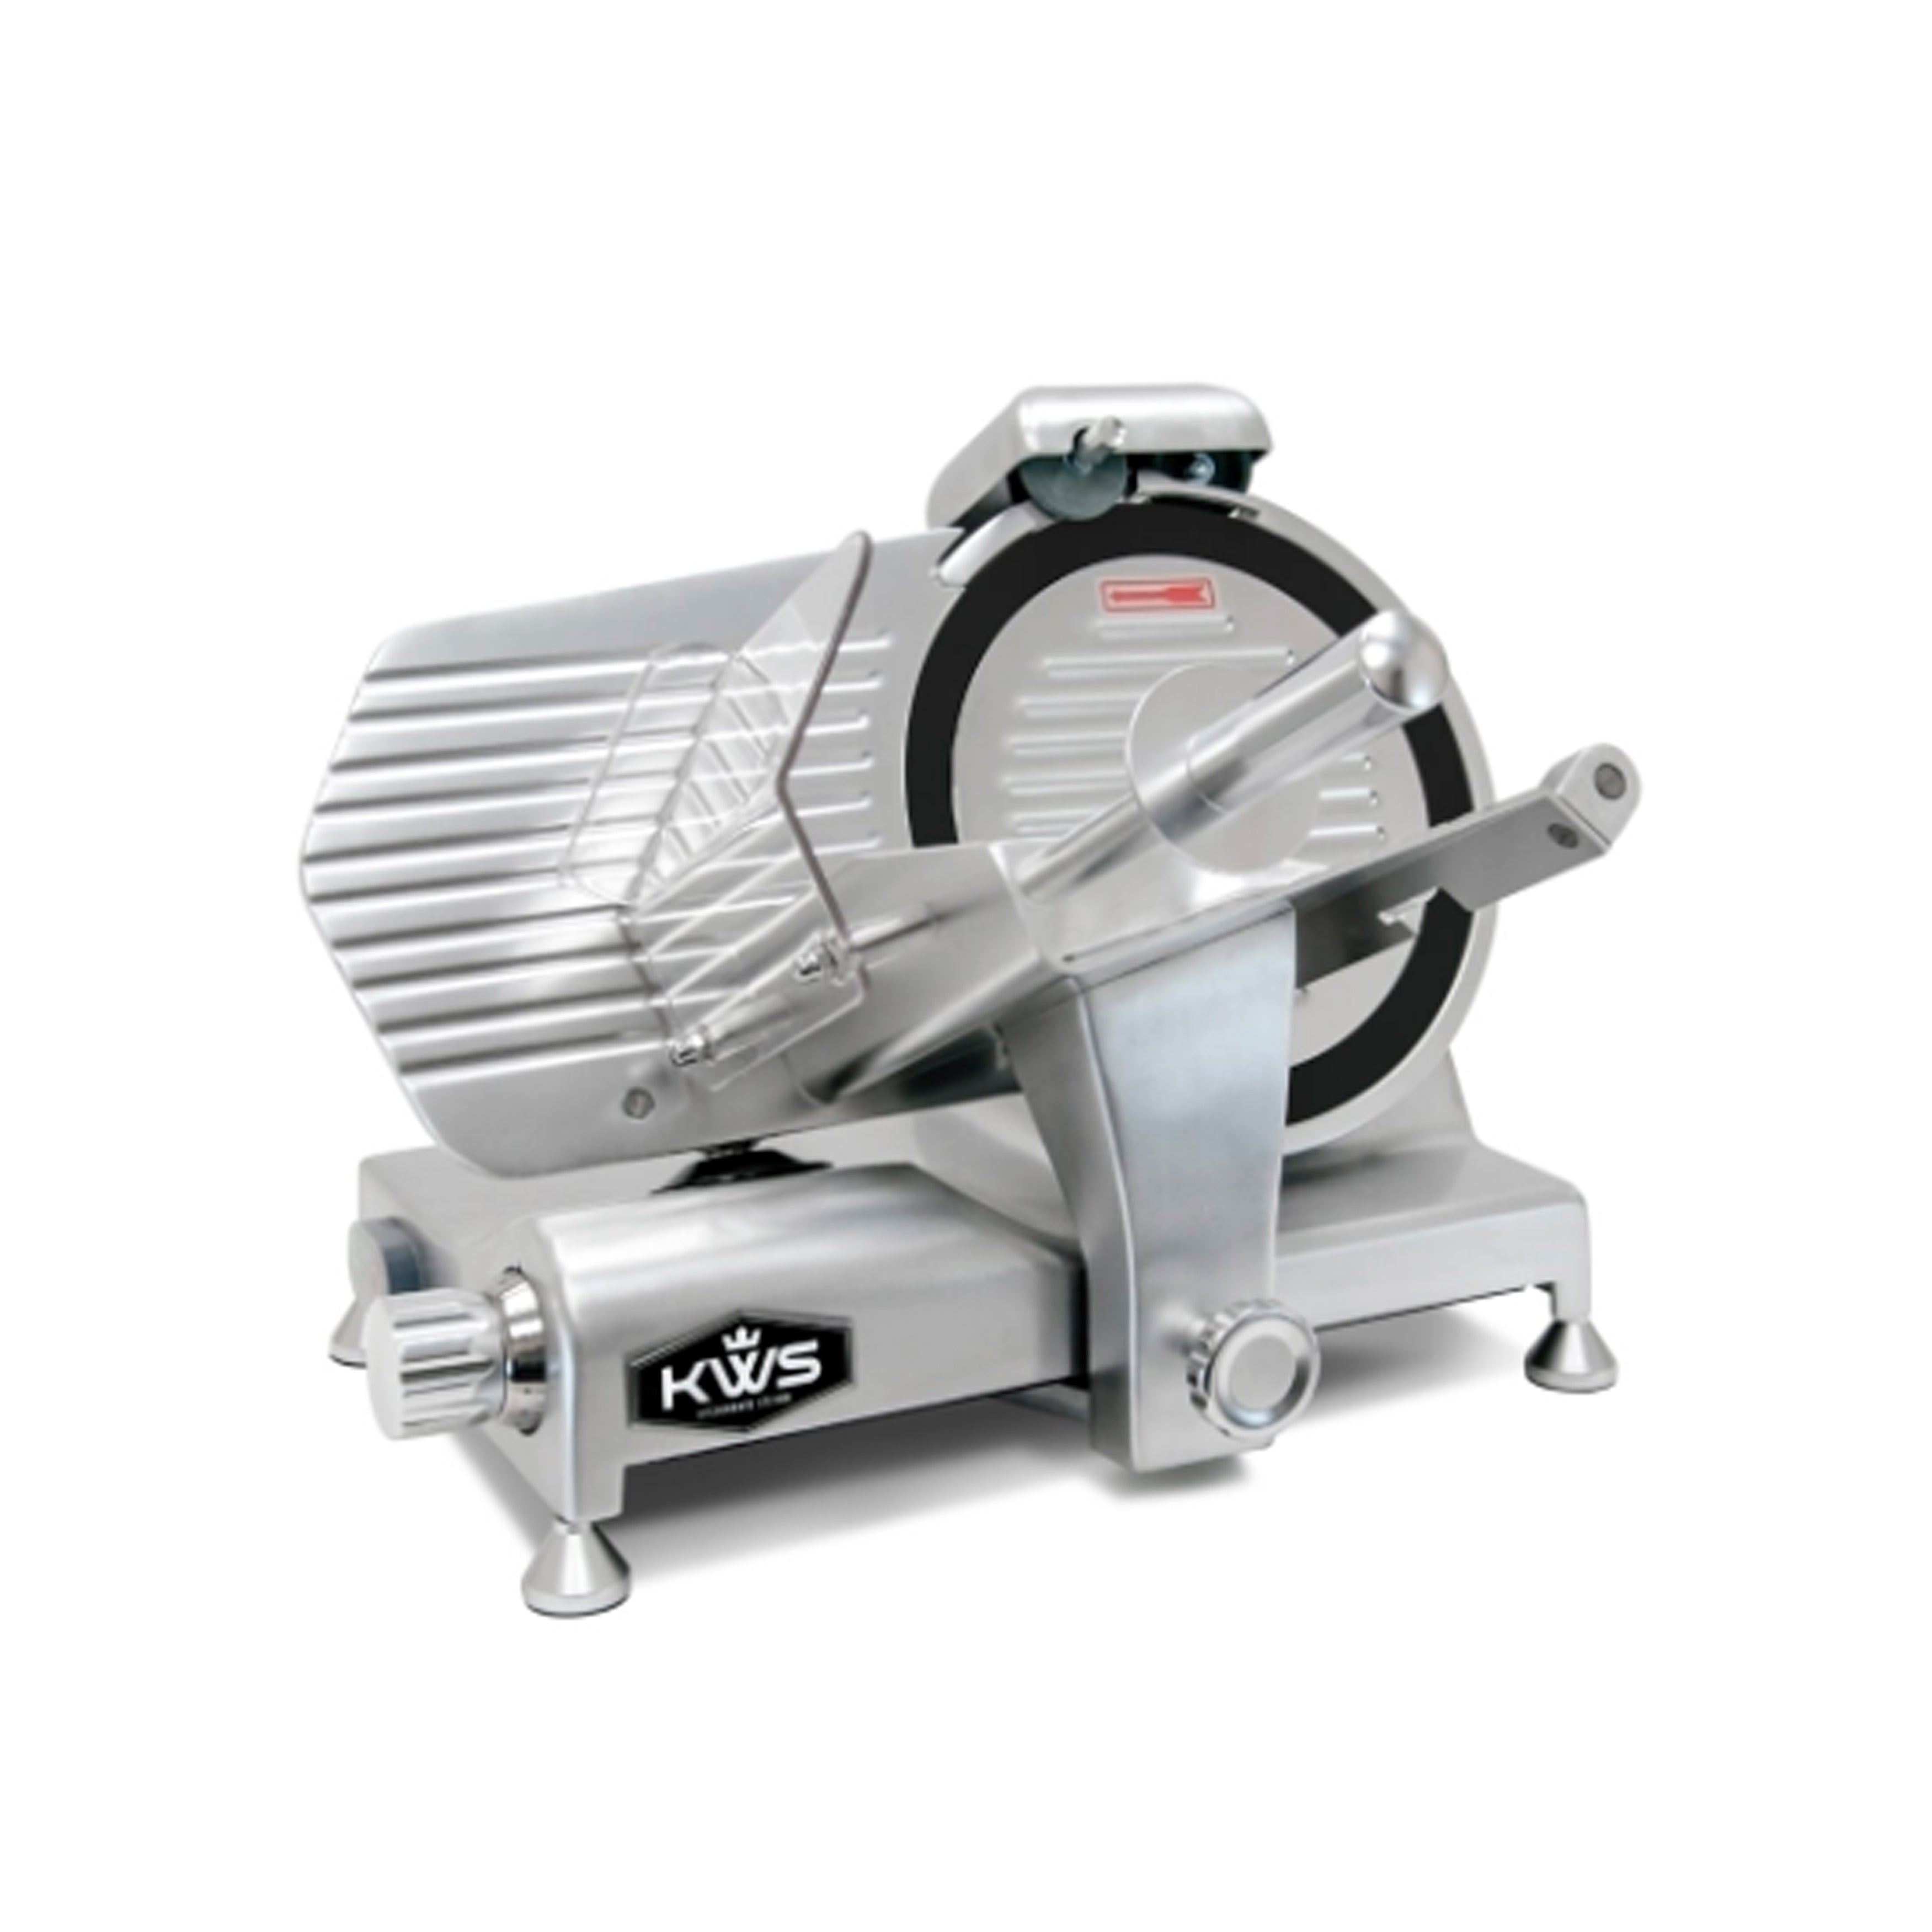 KWS - MS-10DT, Commercial 10" Electric Meat Slicer Aluminum Alloy Base and Teflon Blade